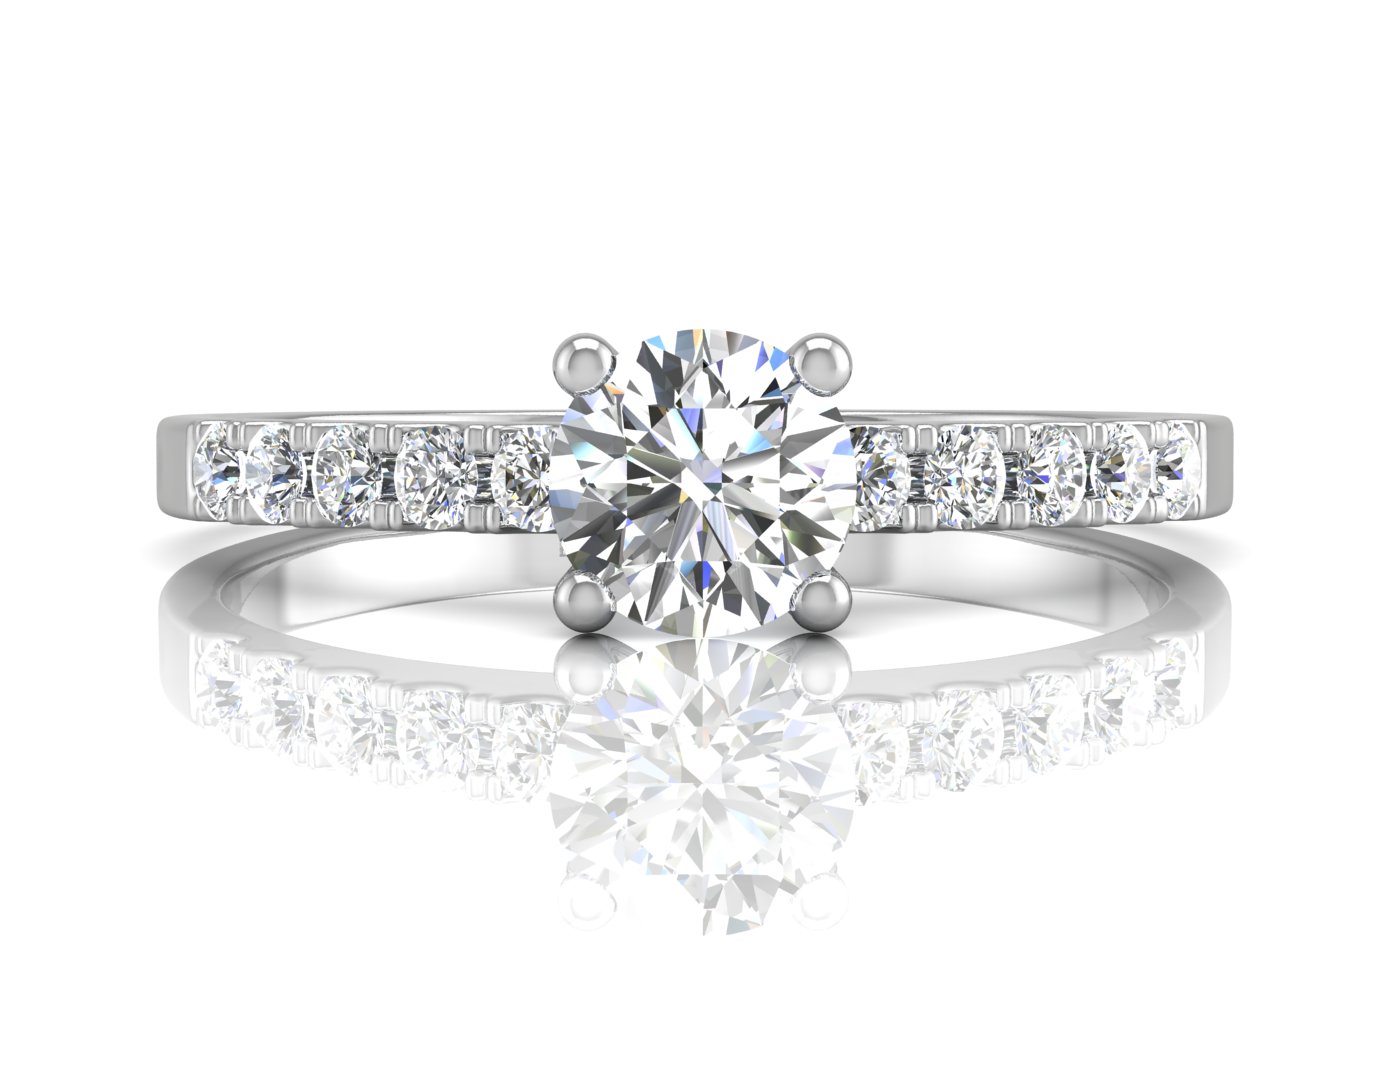 View Our Diamond Engagement Ring Collection